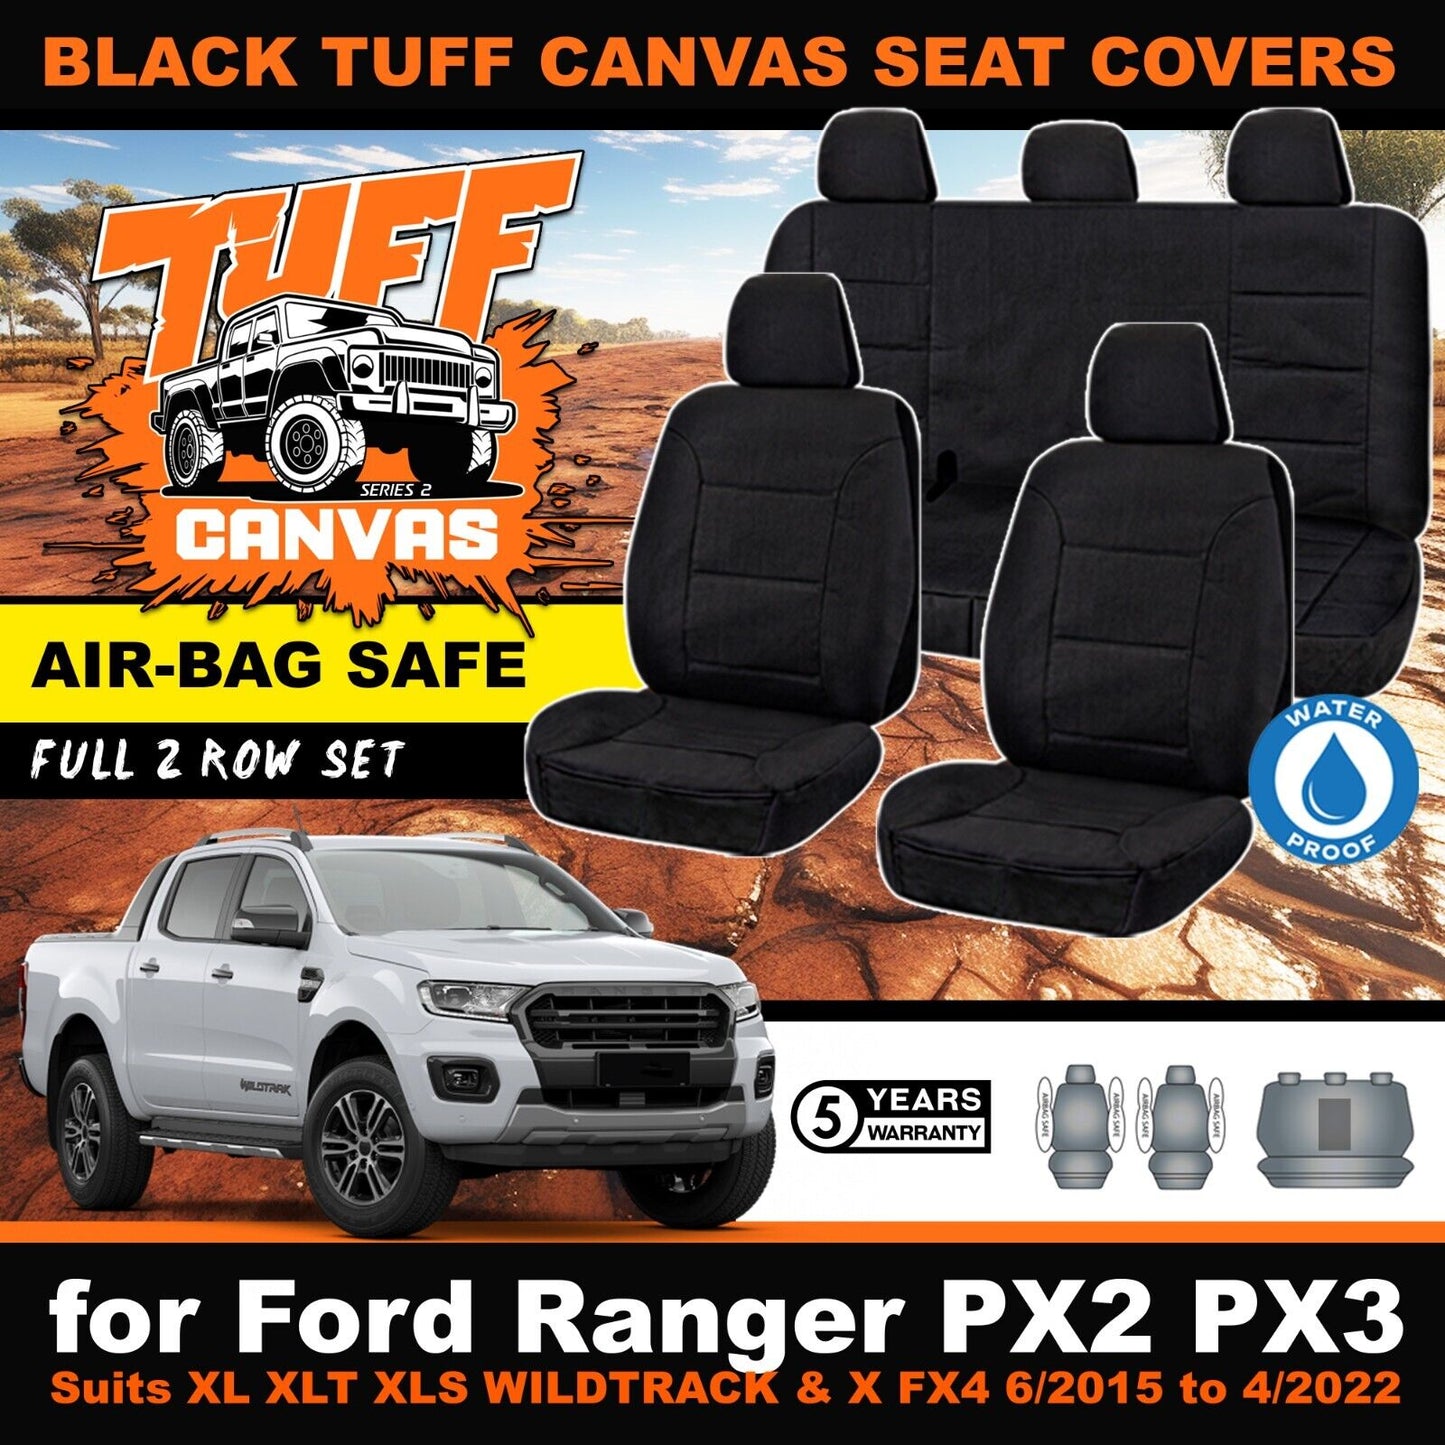 Black Tuff Canvas S2 Seat Covers 2 Rows For Ford Ranger PX2 PX3 Dual Cab Wildtrack FX4 XLT 6/2015-4/2022